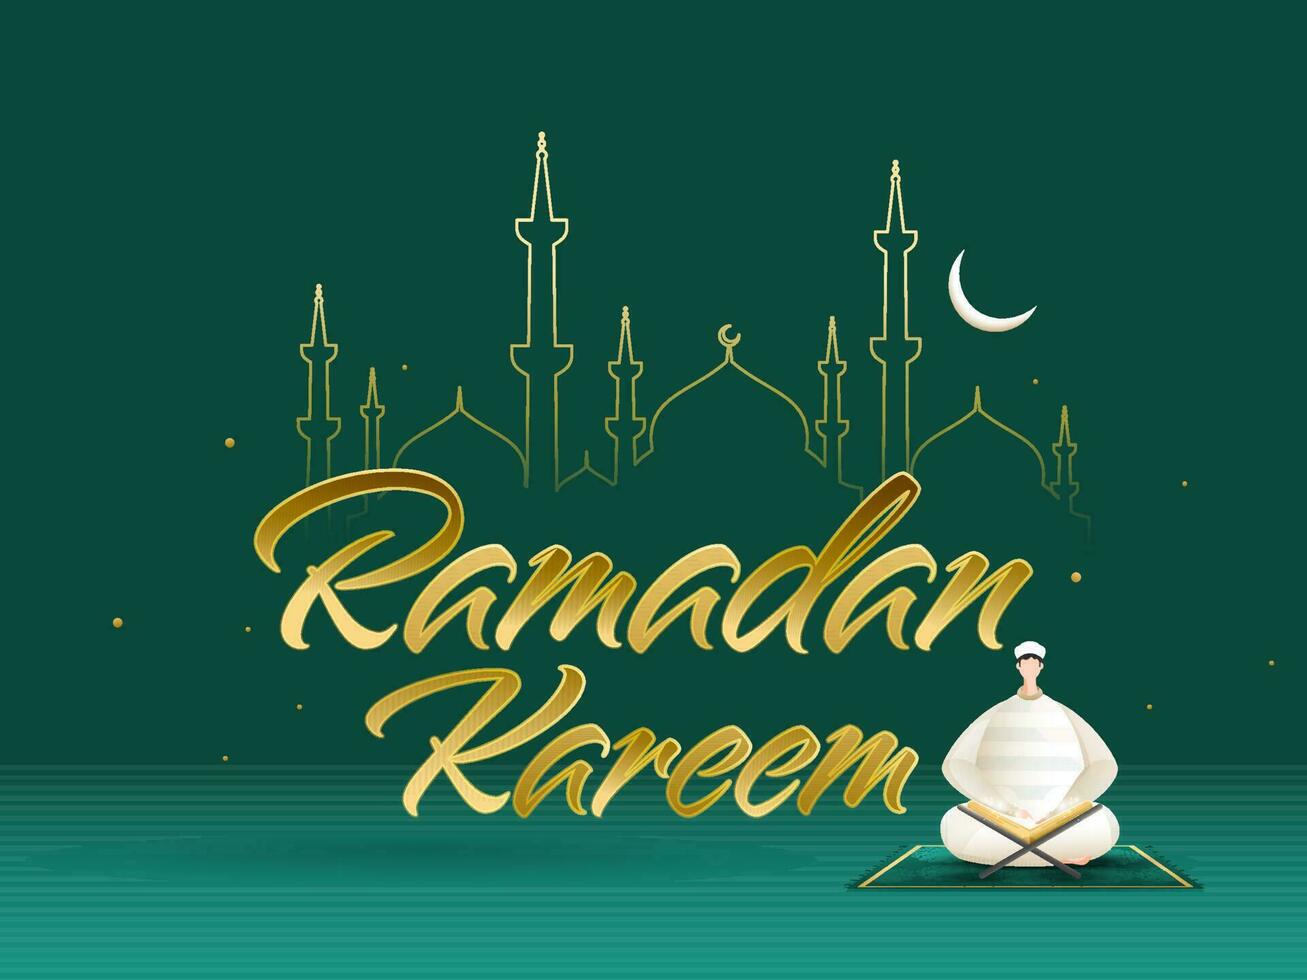 Golden Ramadan Kareem Font With Muslim Man Reading A Quran Book, Crescent Moon And Line Art Mosque On Teal Background. vector